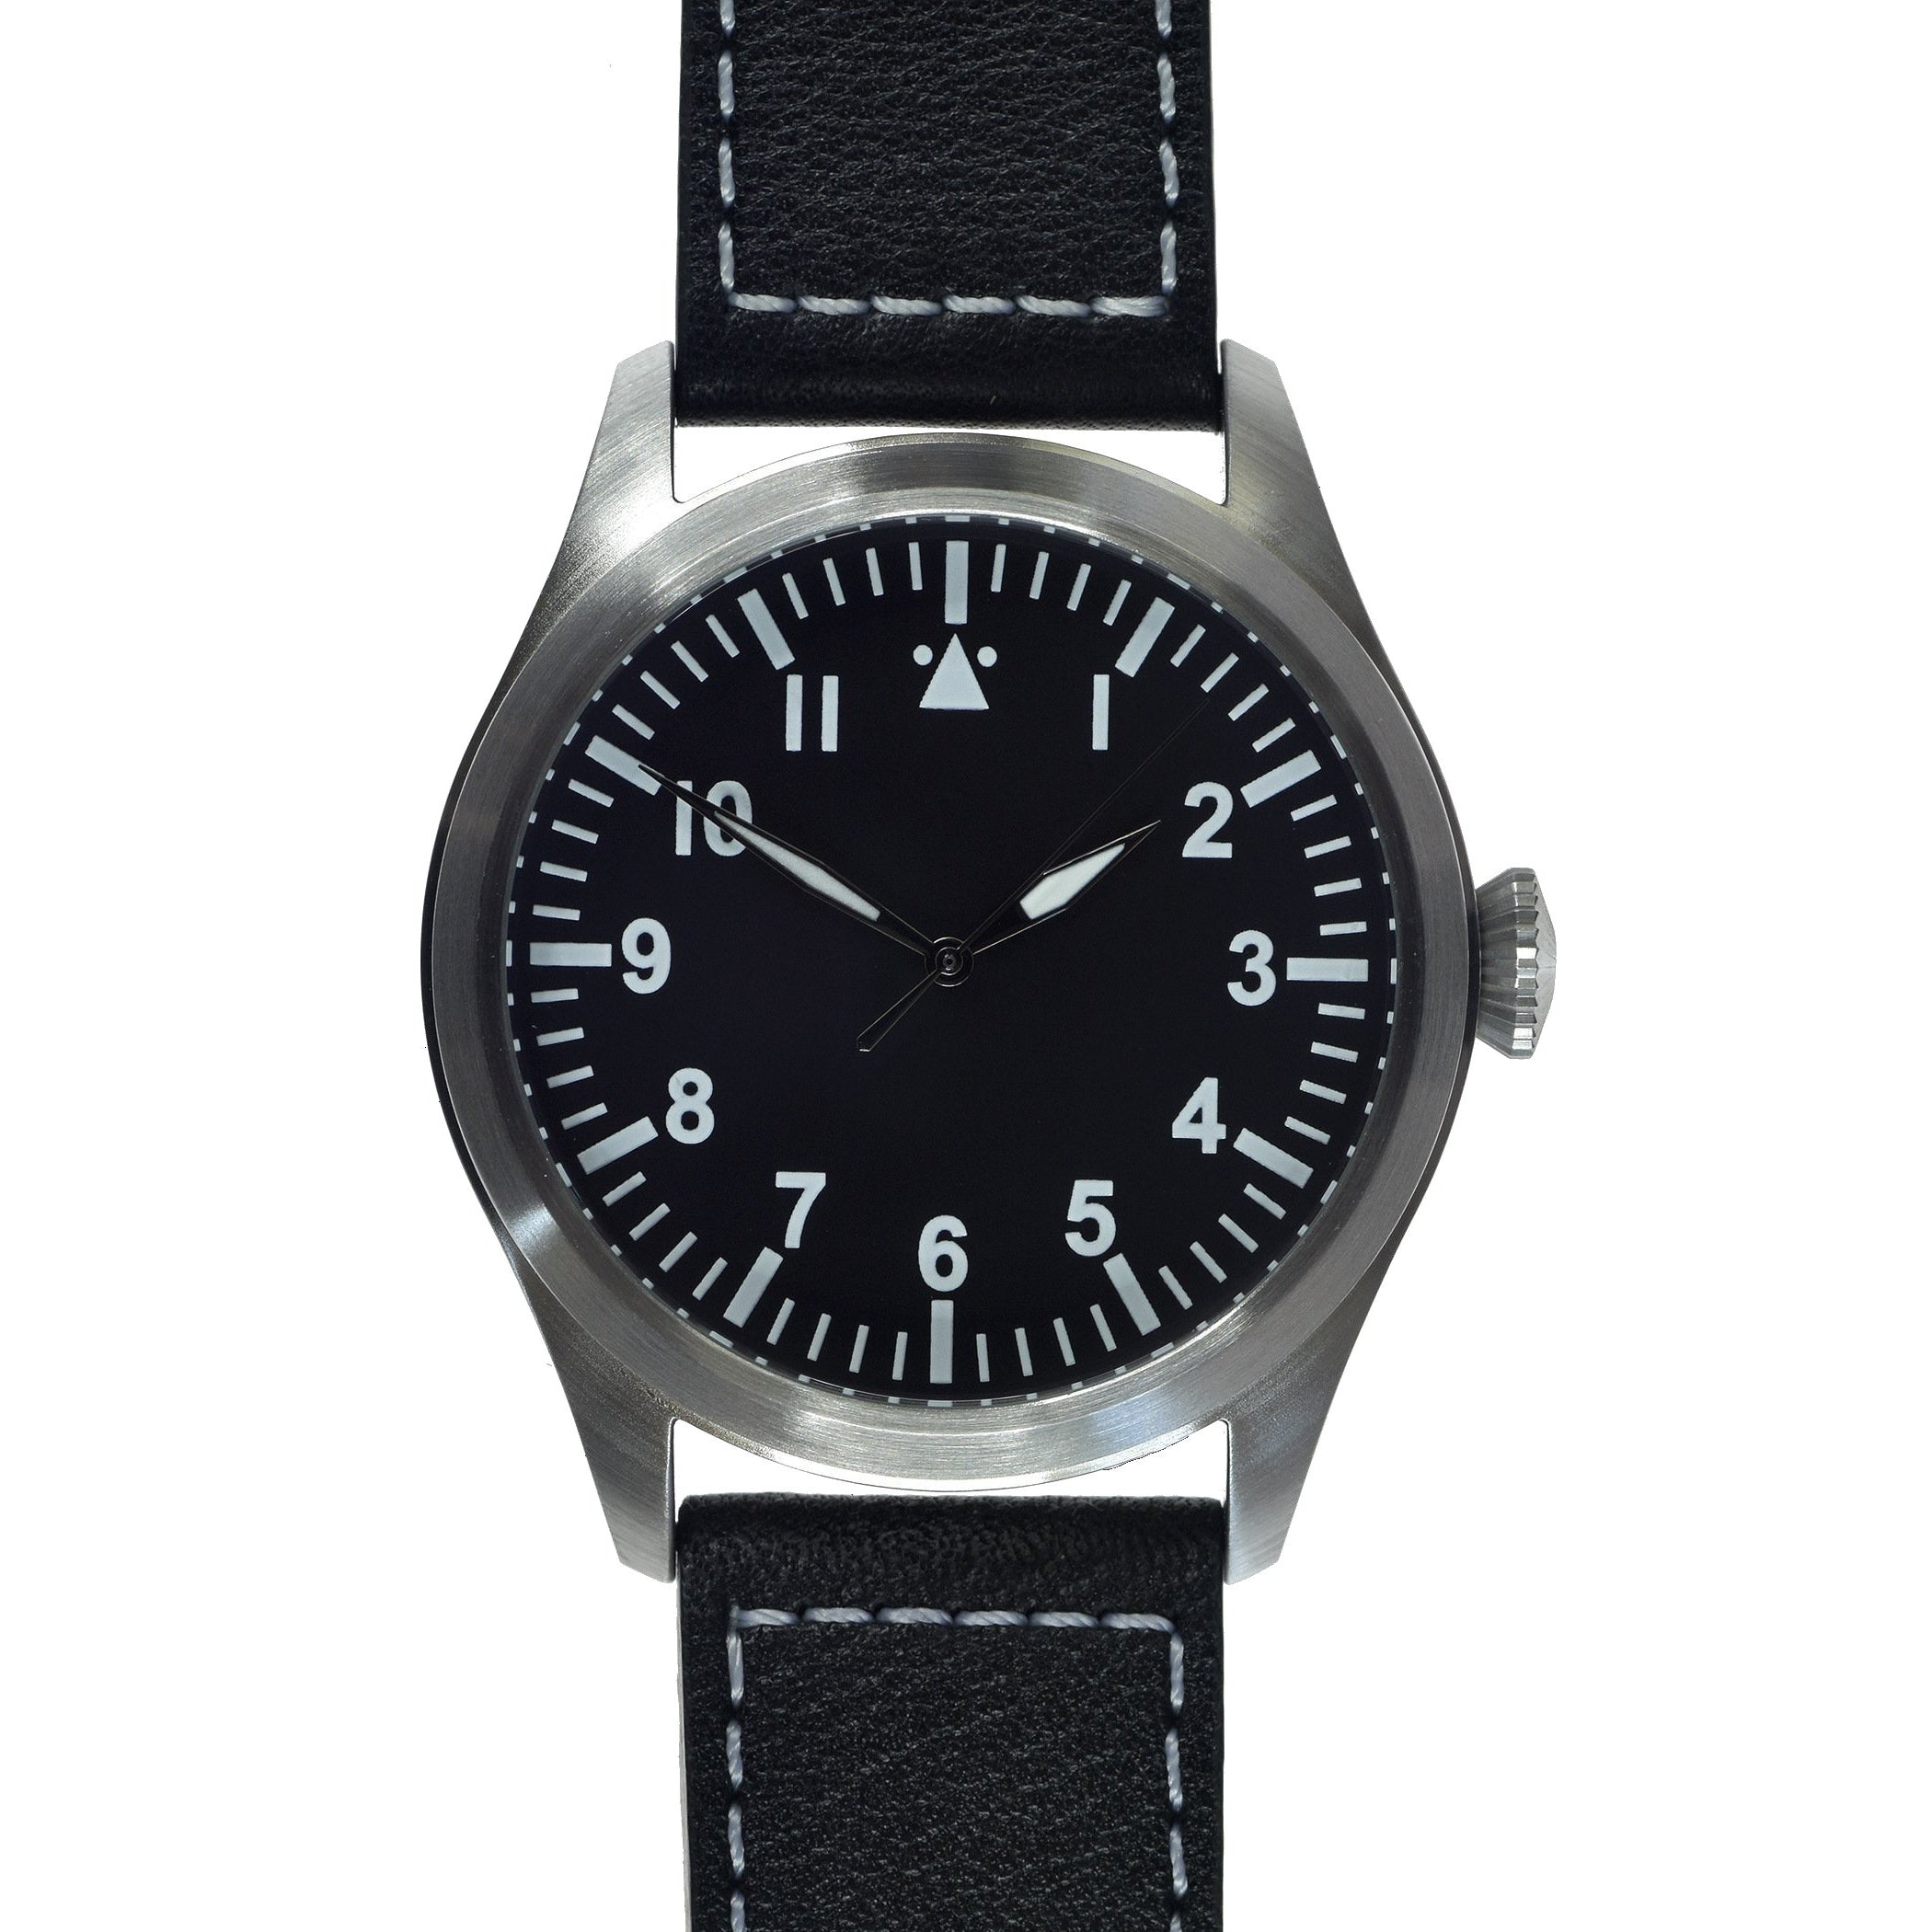 MWC Classic 46mm Limited Edition XL Military Pilots Watch with Sweep Second Hand Unbranded